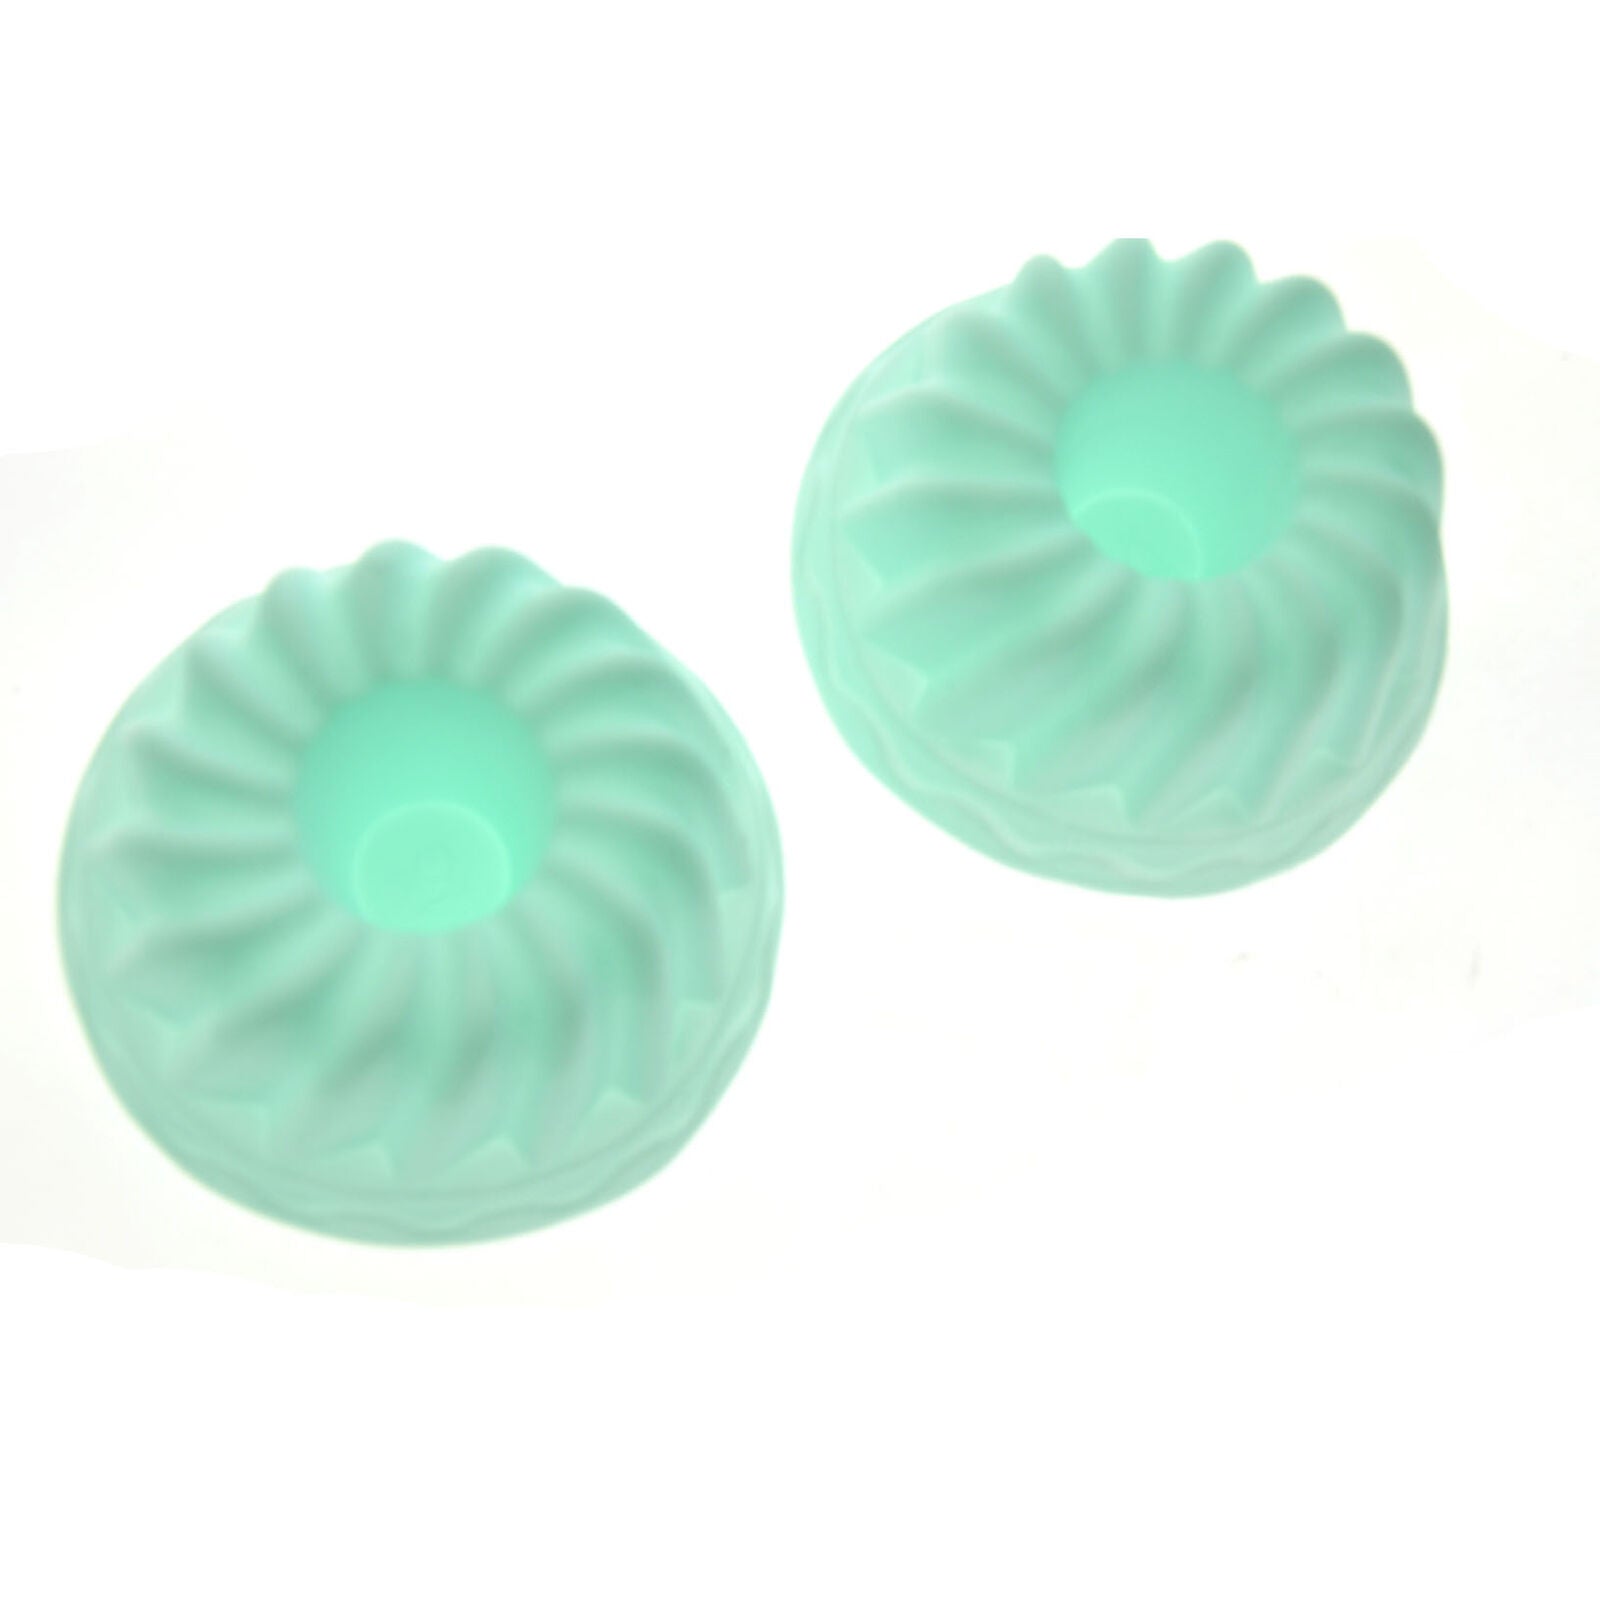 Thicken Hollow Spiral Shaped Silicone Cake Mold Bakeware Baking Tool